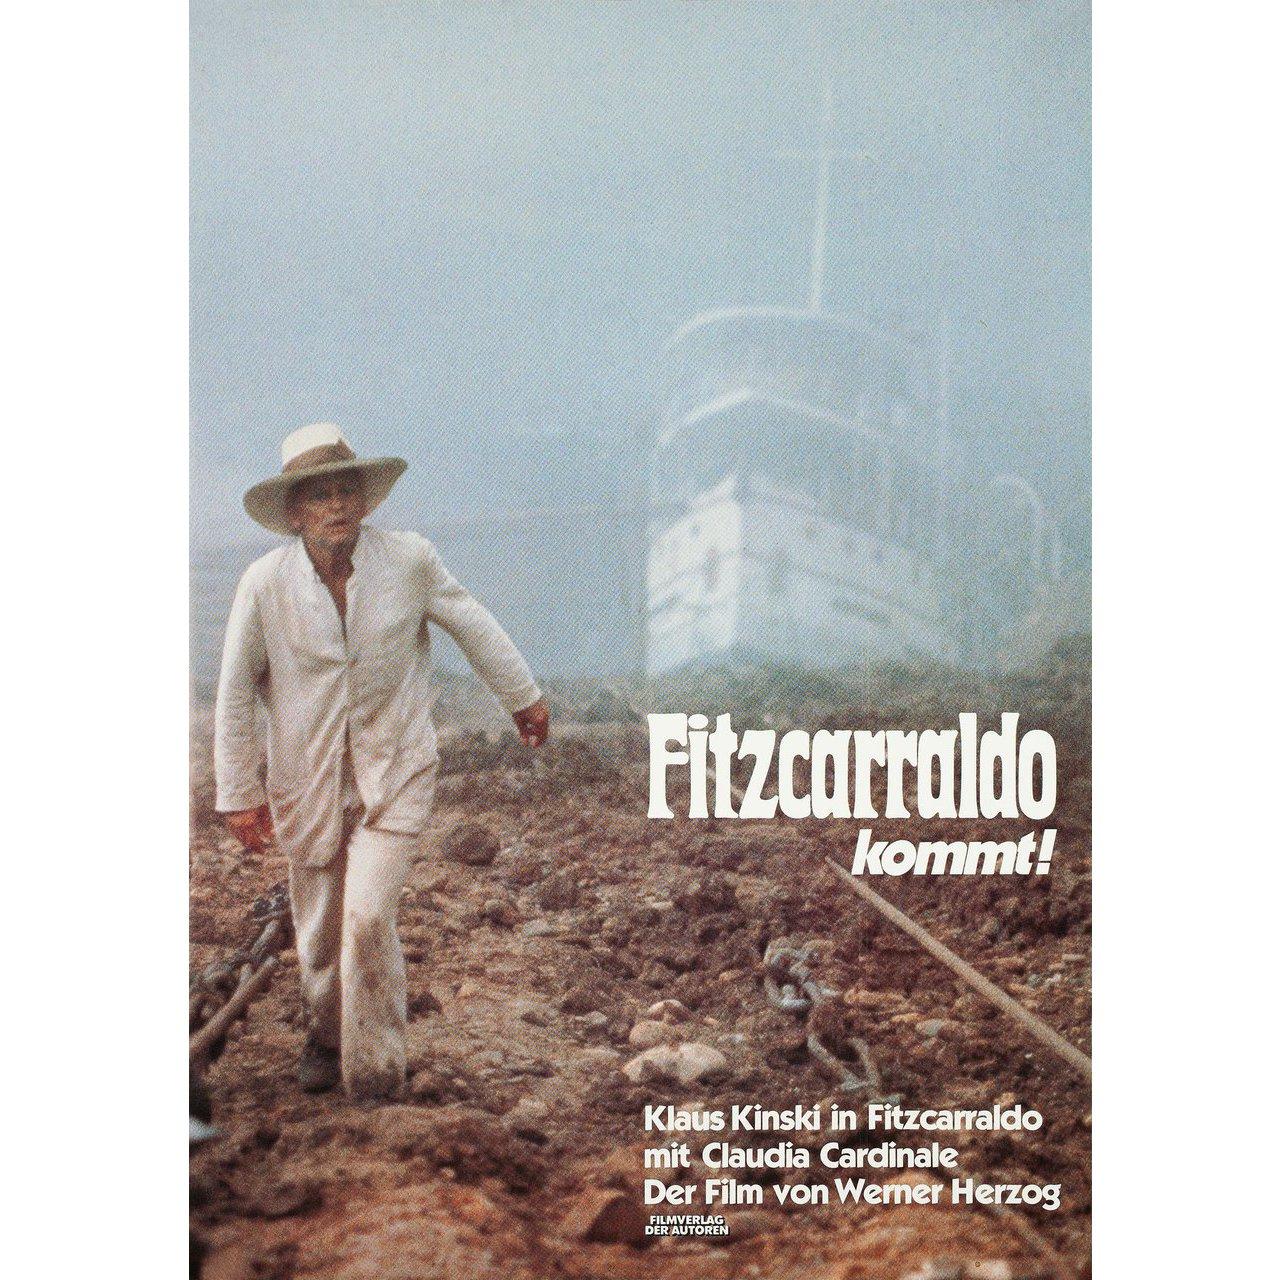 Original 1982 German A1 poster for the film Fitzcarraldo directed by Werner Herzog with Klaus Kinski / Claudia Cardinale / Jose Lewgoy / Miguel Angel Fuentes. Very Good-Fine condition, rolled. Please note: the size is stated in inches and the actual